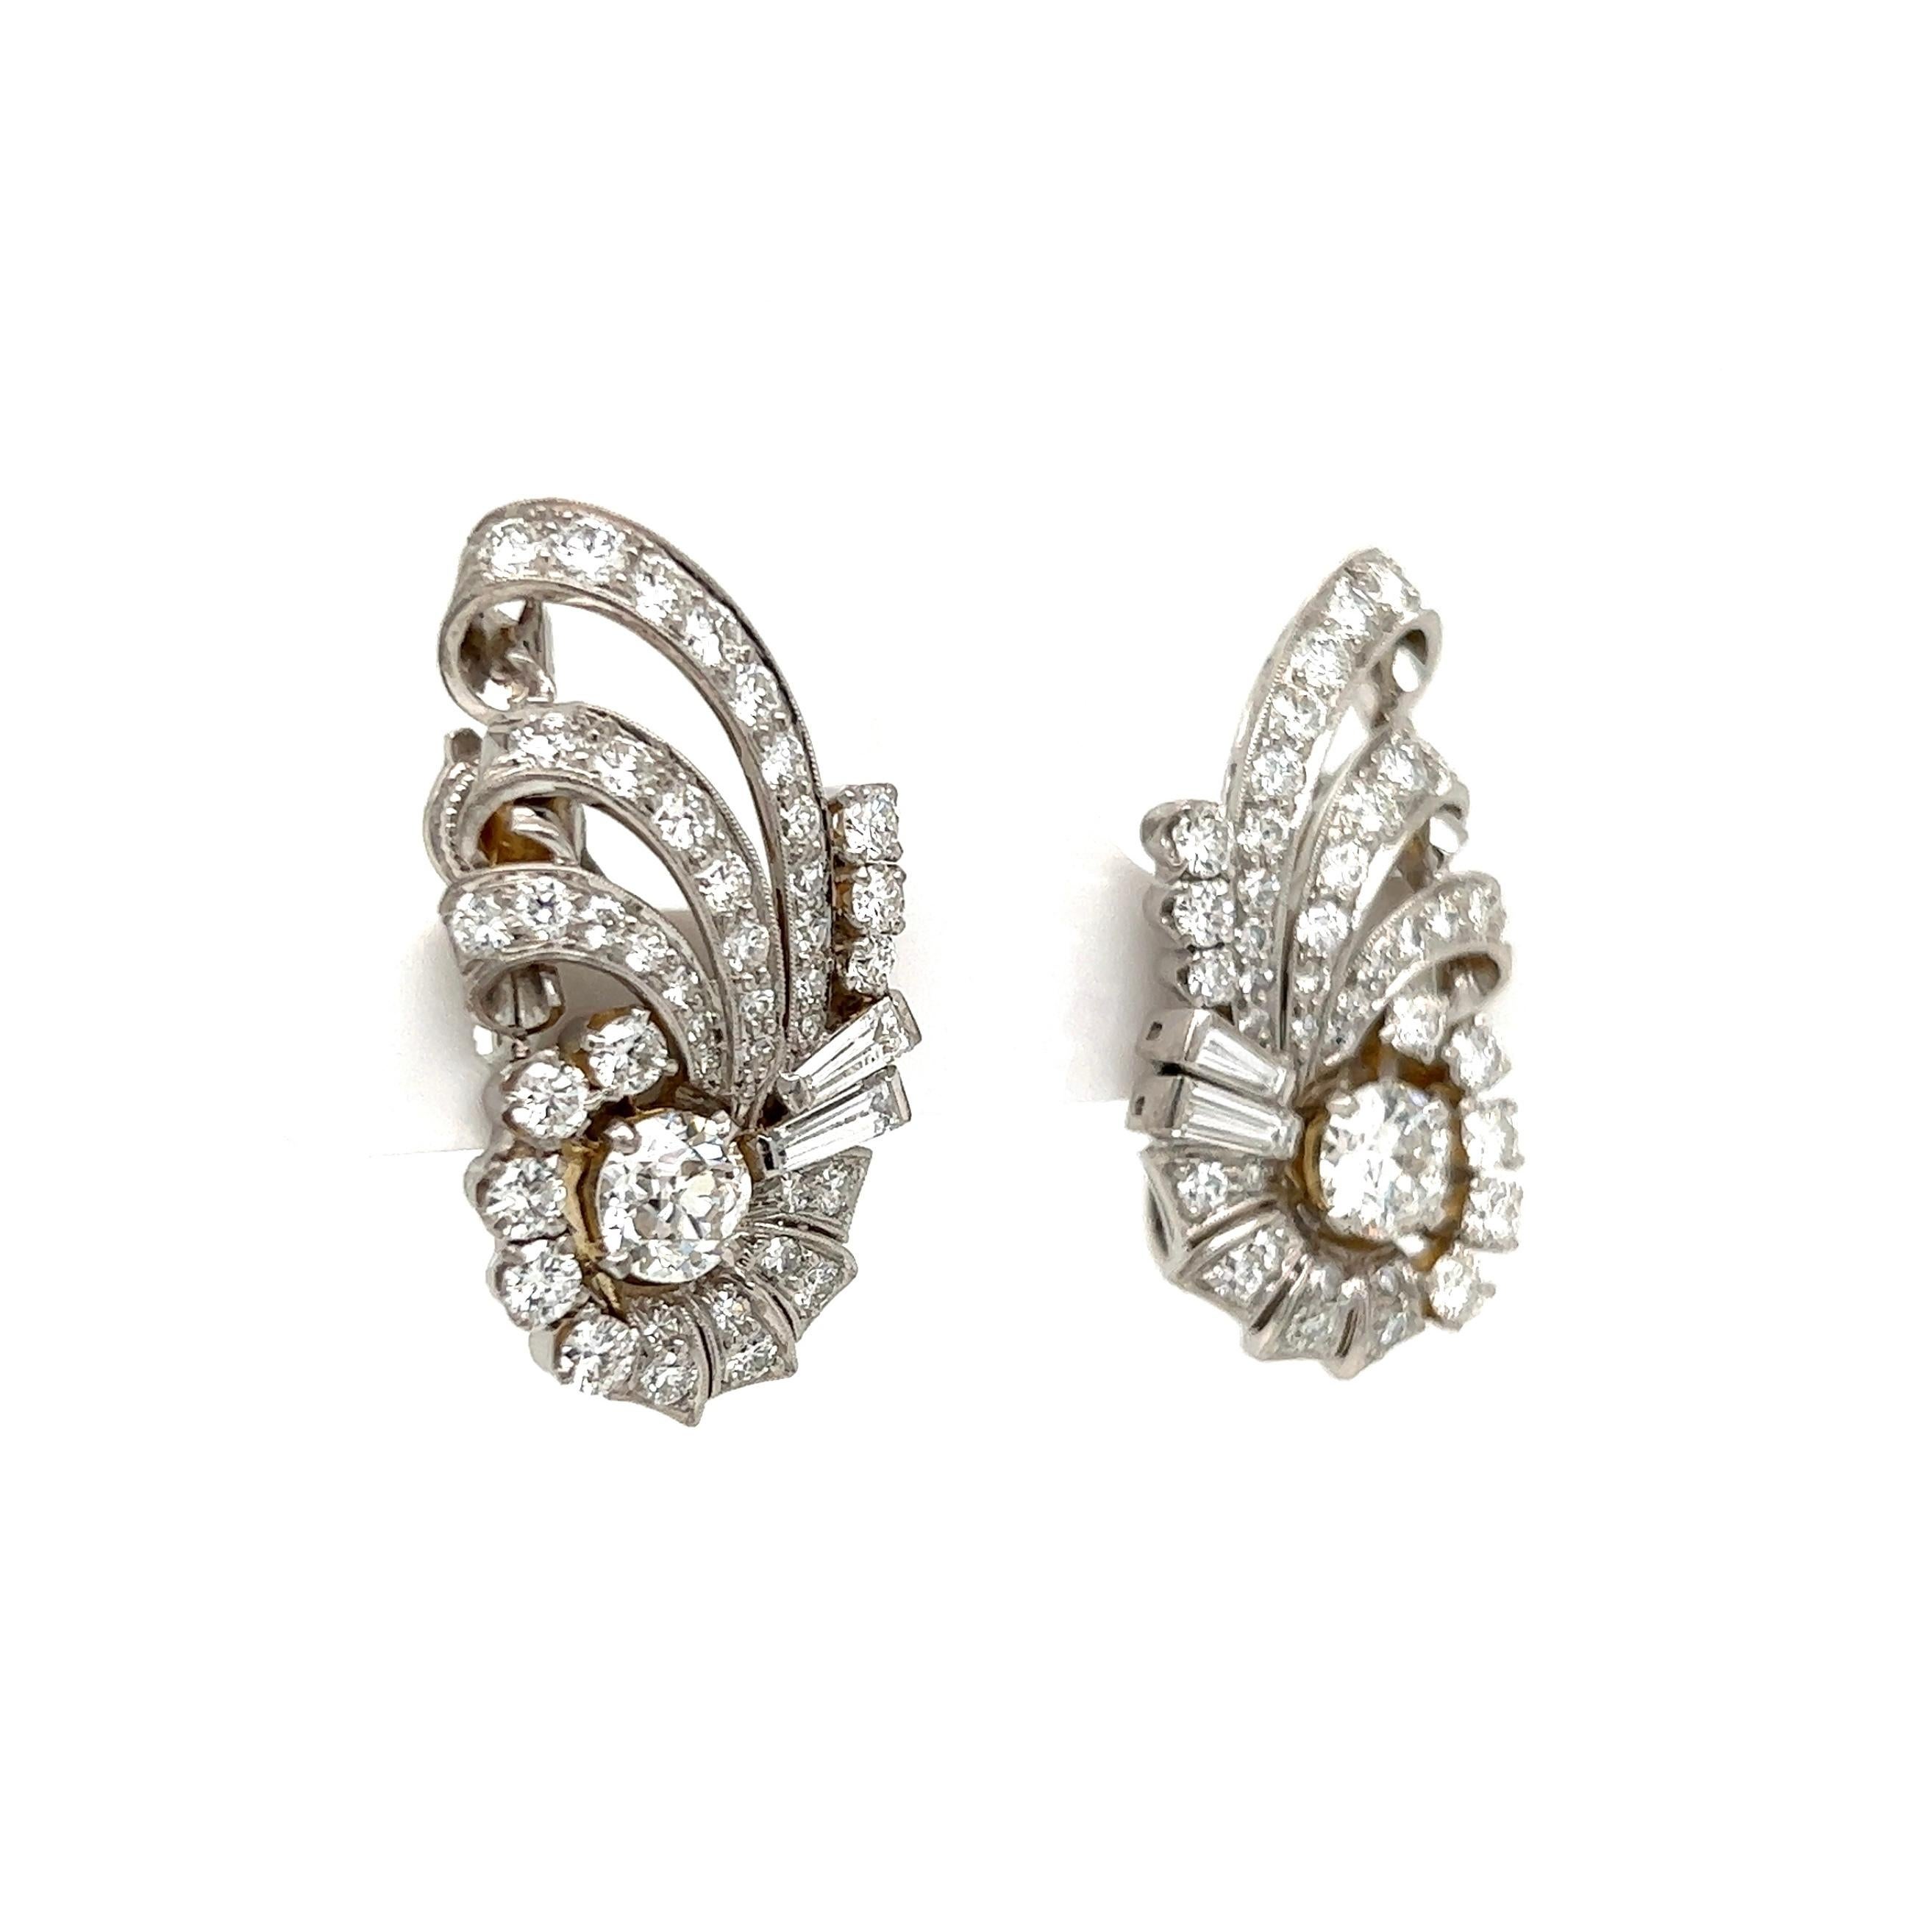 Simply Beautiful! High Quality RAYMOND YARD Designer Earrings. Securely Hand set with 2 Old European-Cut Diamonds approx. 1.30tcw, 82 RBC/OEC/SC weighing approx. 2.87tcw, 4 baguettes approx. 0.30tcw. Dimensions 1.2